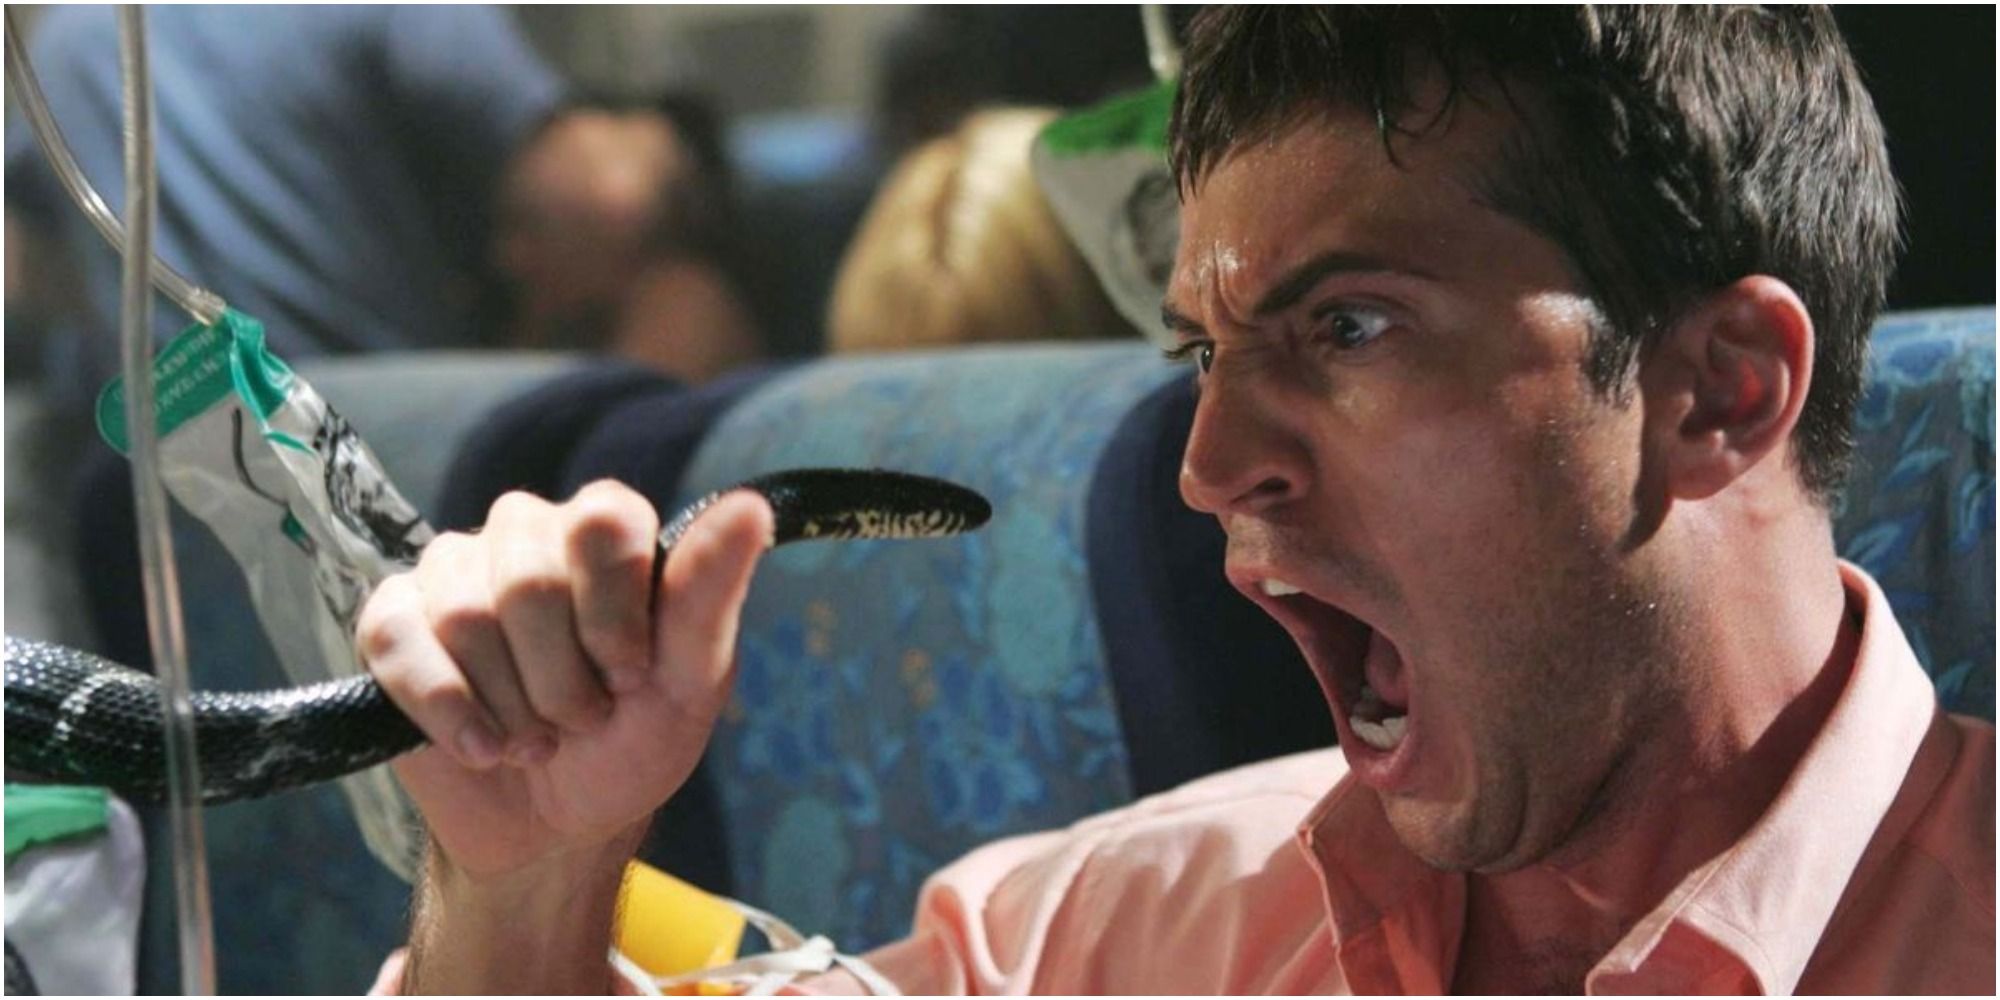 A man holding a snake and screaming